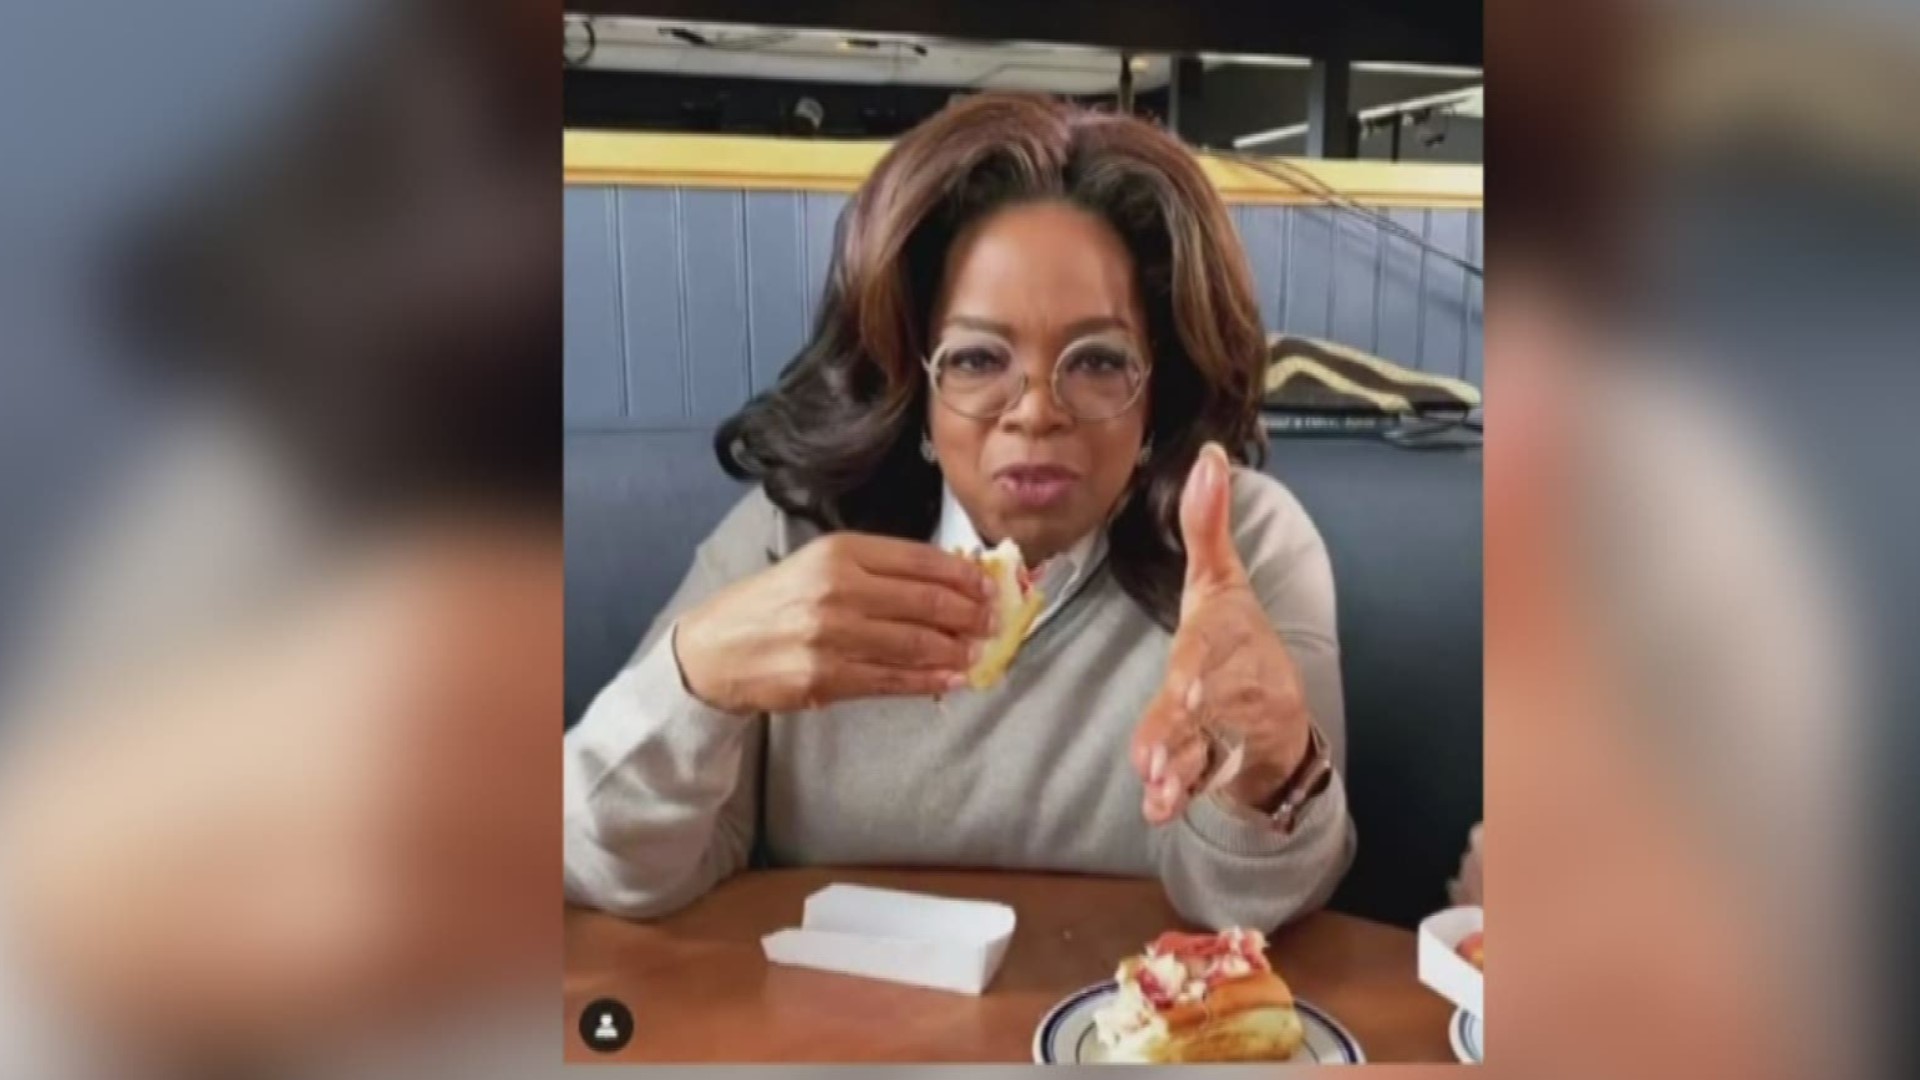 Oprah came to Maine for the first time and had her first lobster roll at Dolphin Marina in Harpswell.